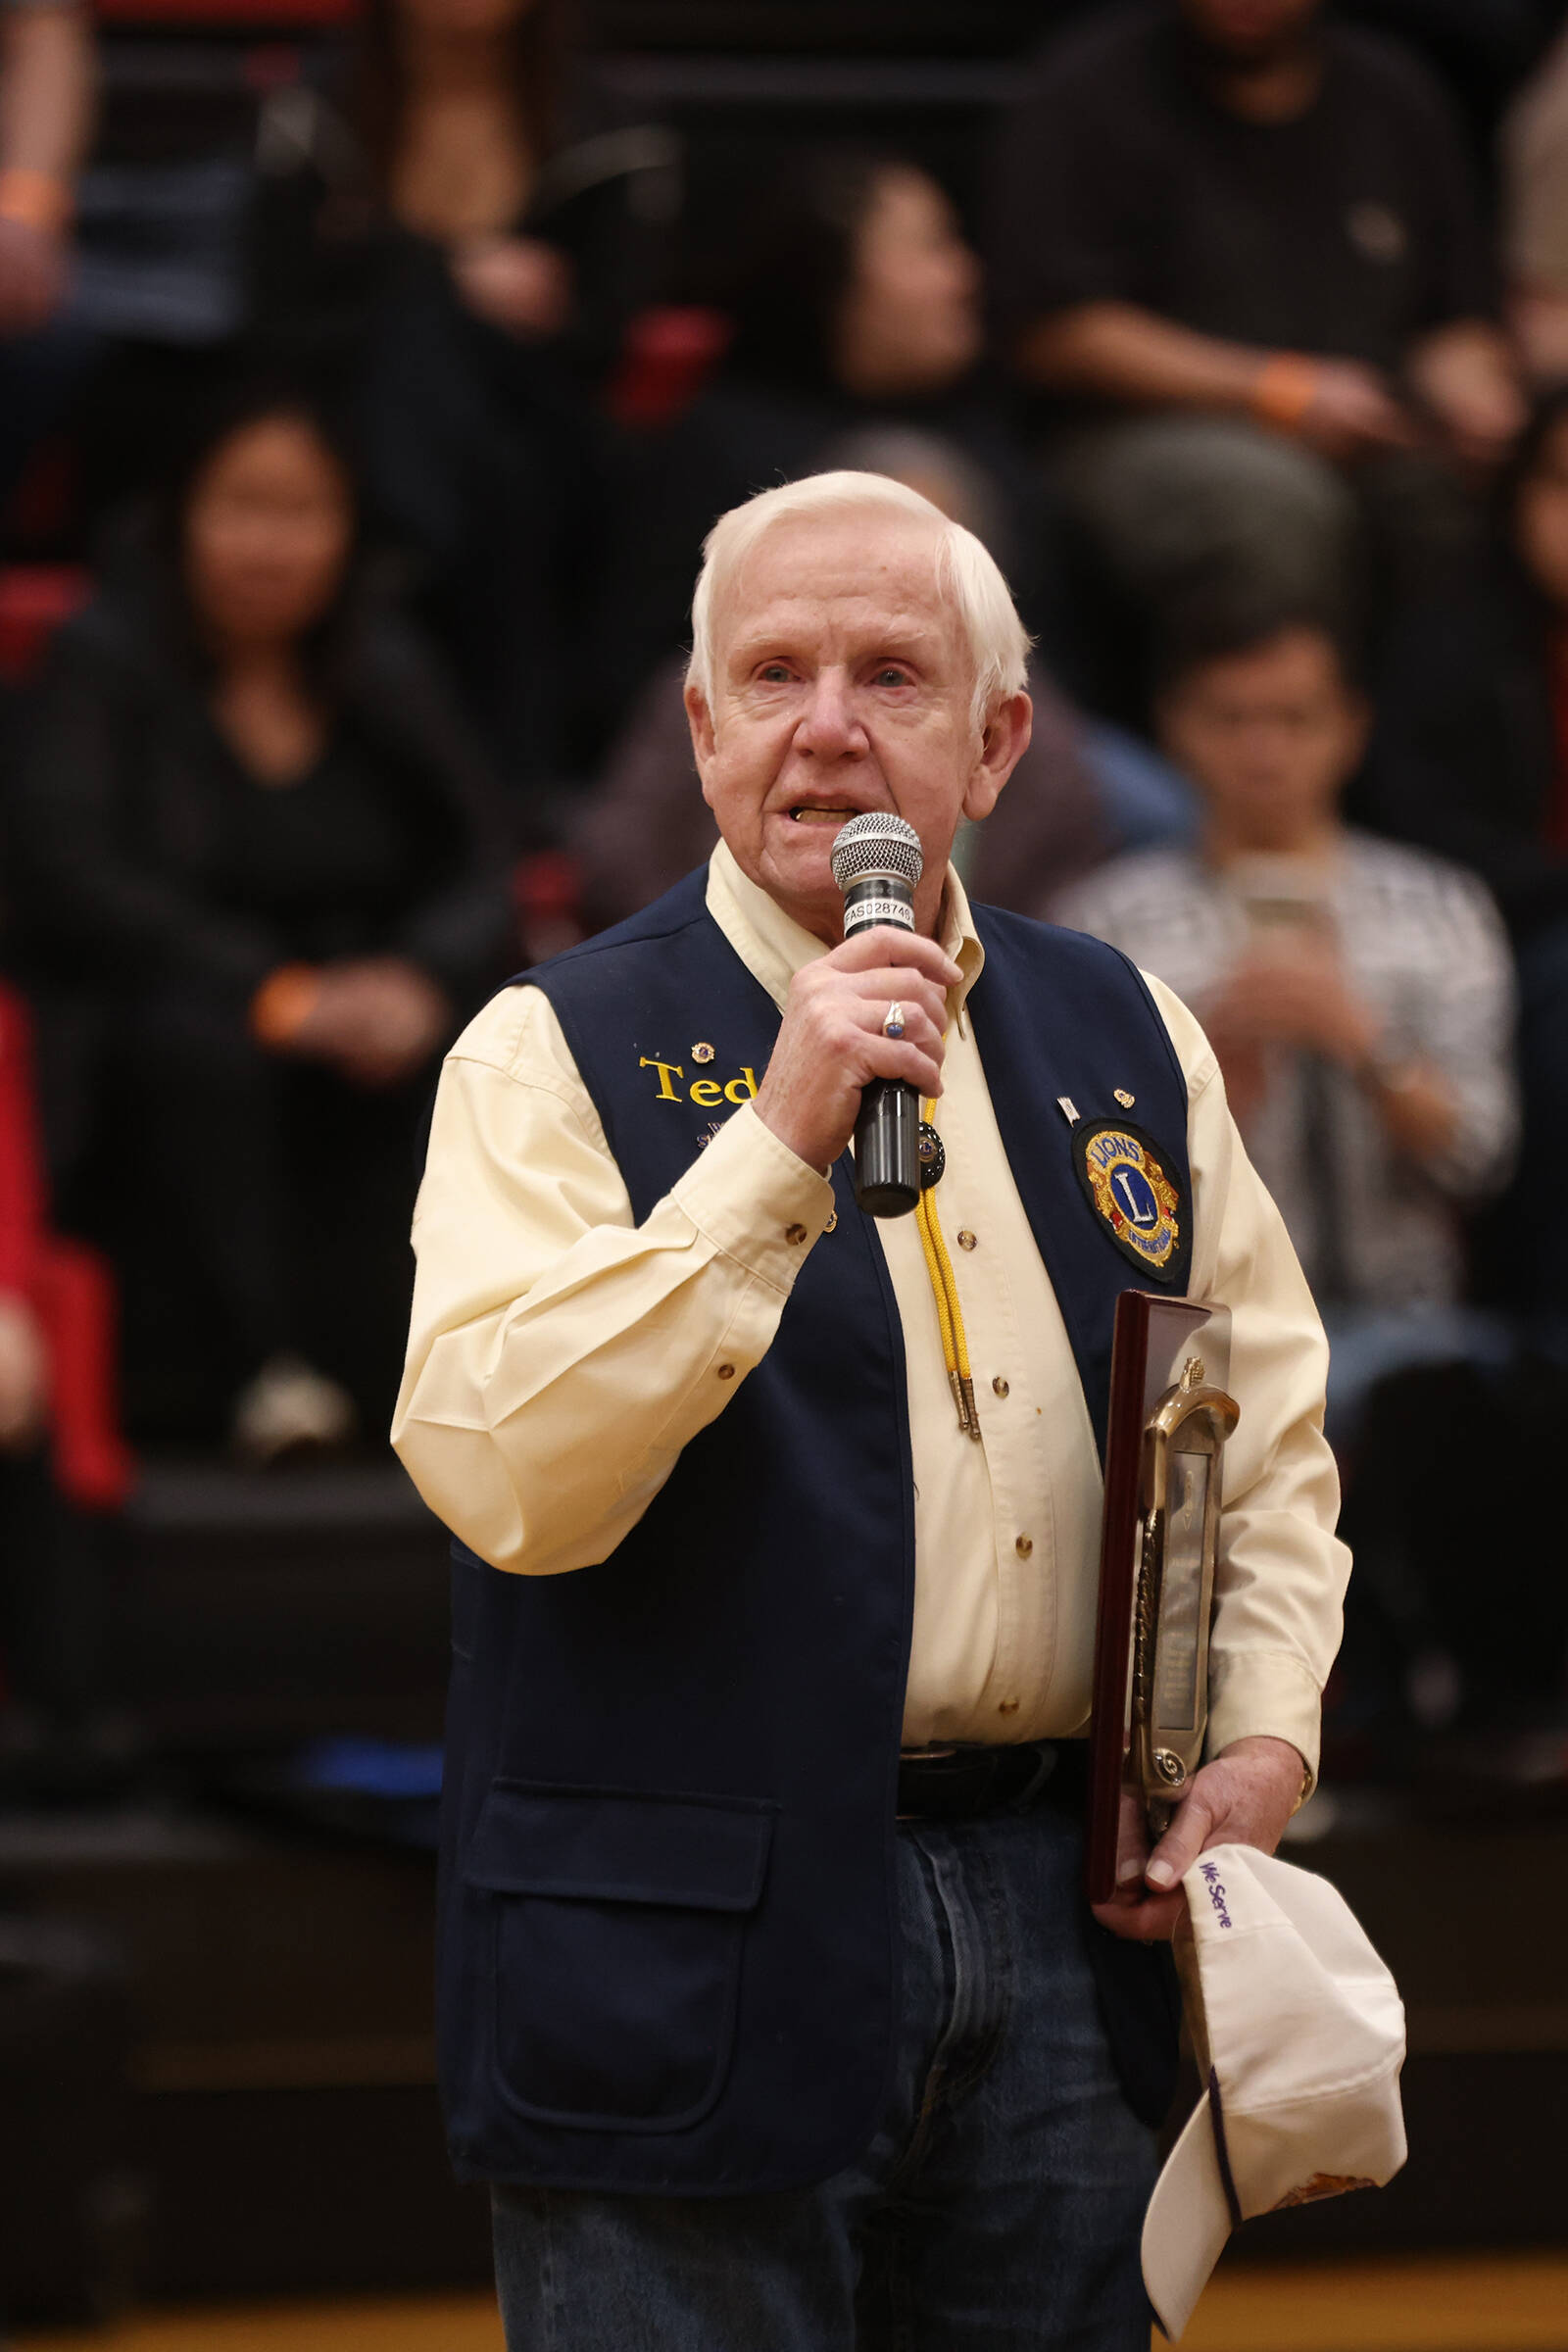 Ted Burke, this year’s recipient of the Dr. Walter Soboleff Award at the Juneau Lions Club 74th Annual Gold Medal Tournament addresses the crowd in the Juneau-Douglas High School: Yadaa.at Kalé gymnasium. (Ben Hohenstatt / Juneau Empire)